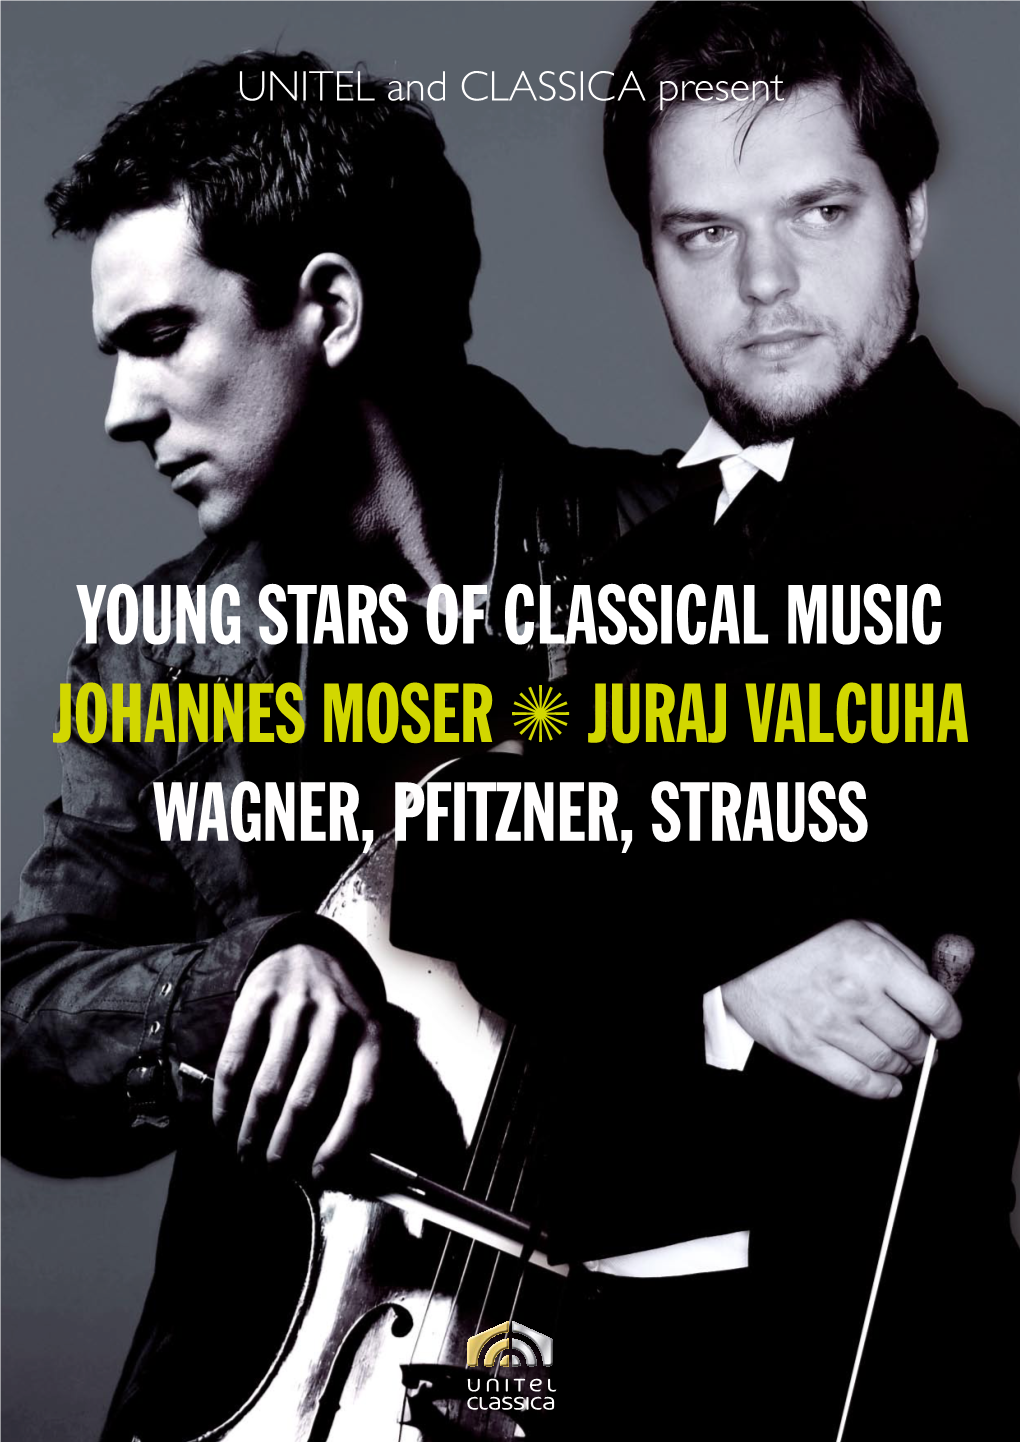 Young Stars of Classical Music Johannes Moser